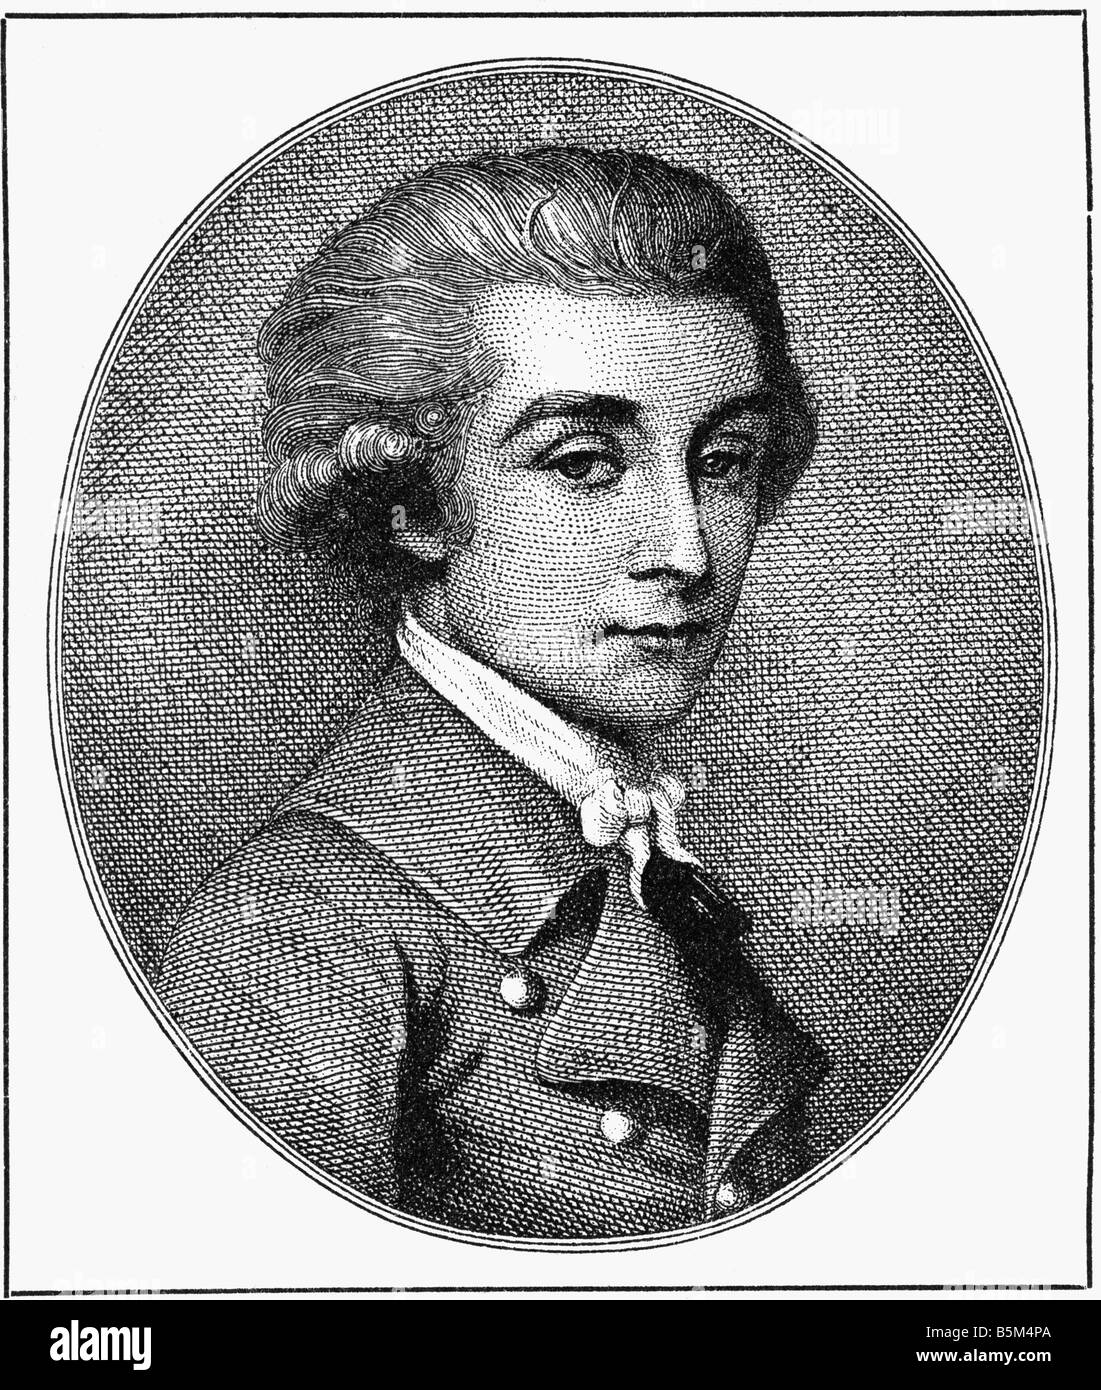 Fersen, Hans Axel Count (the Younger), 4.9.1755 - 20.6.1810, Swedish politician, aged 28, portrait, wood engraving after contemporaneous miniature, Stock Photo